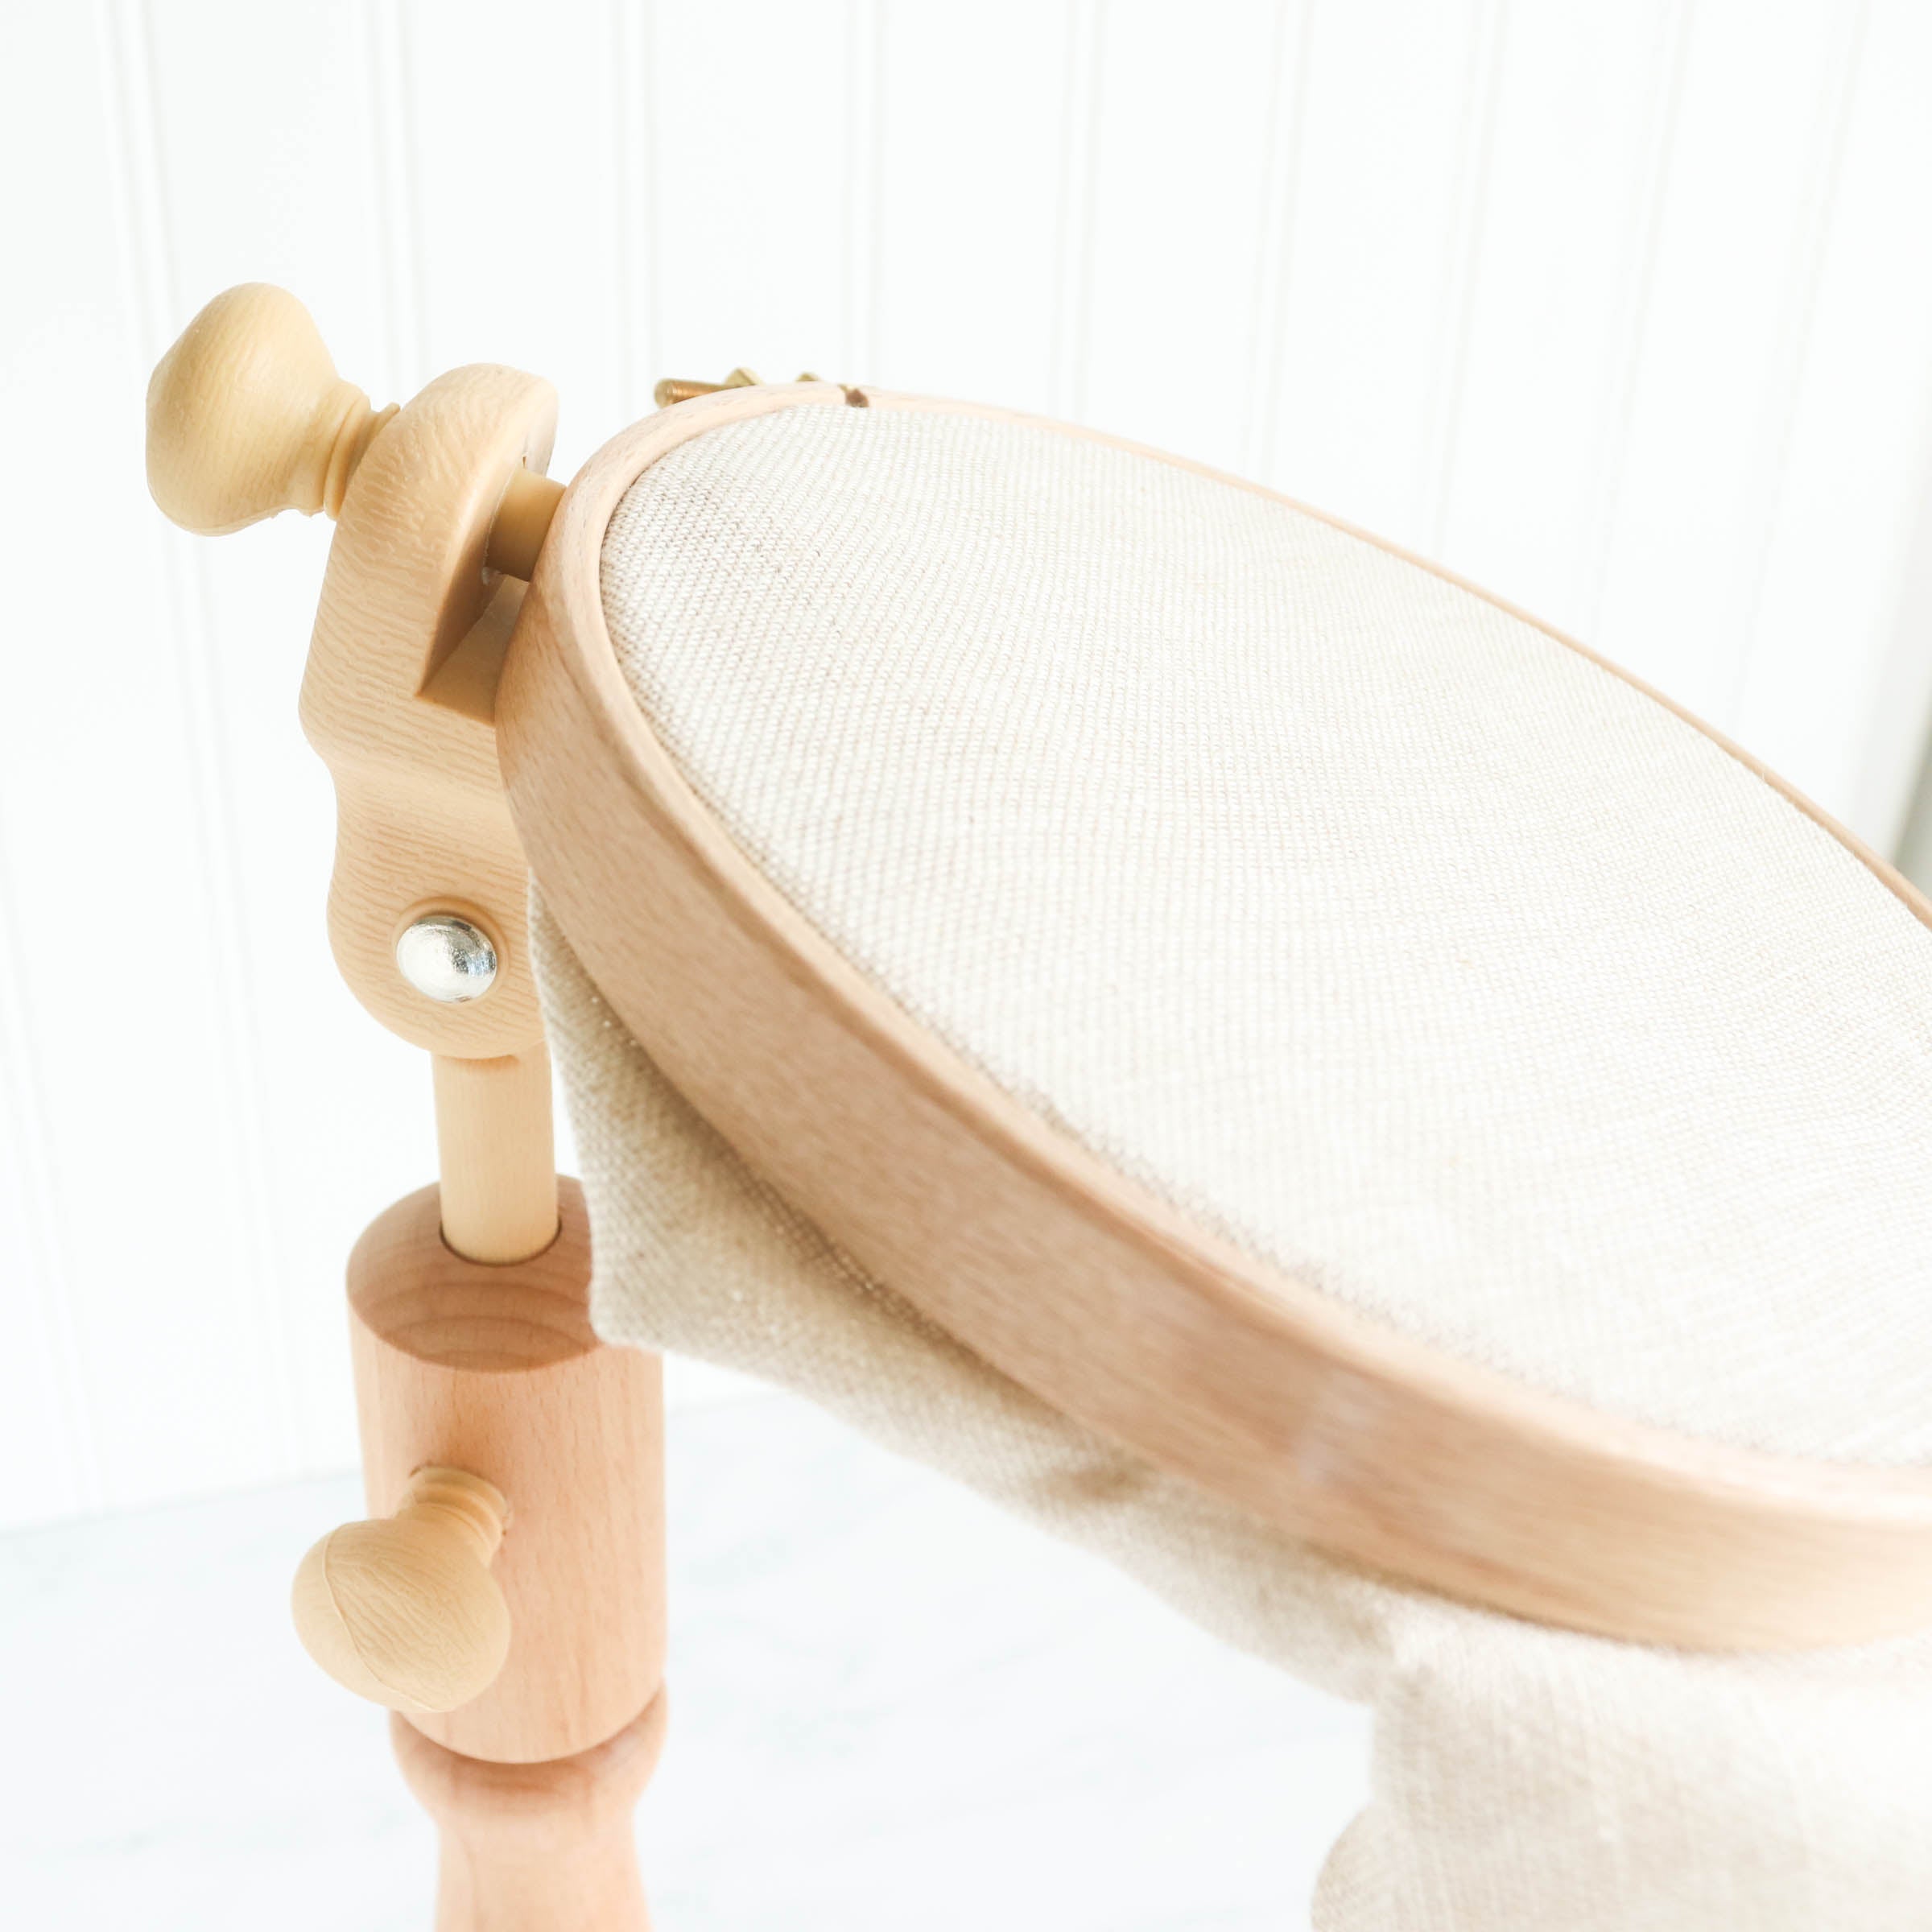 Adjustable Embroidery Hoop Seat Stand - Stitched Modern